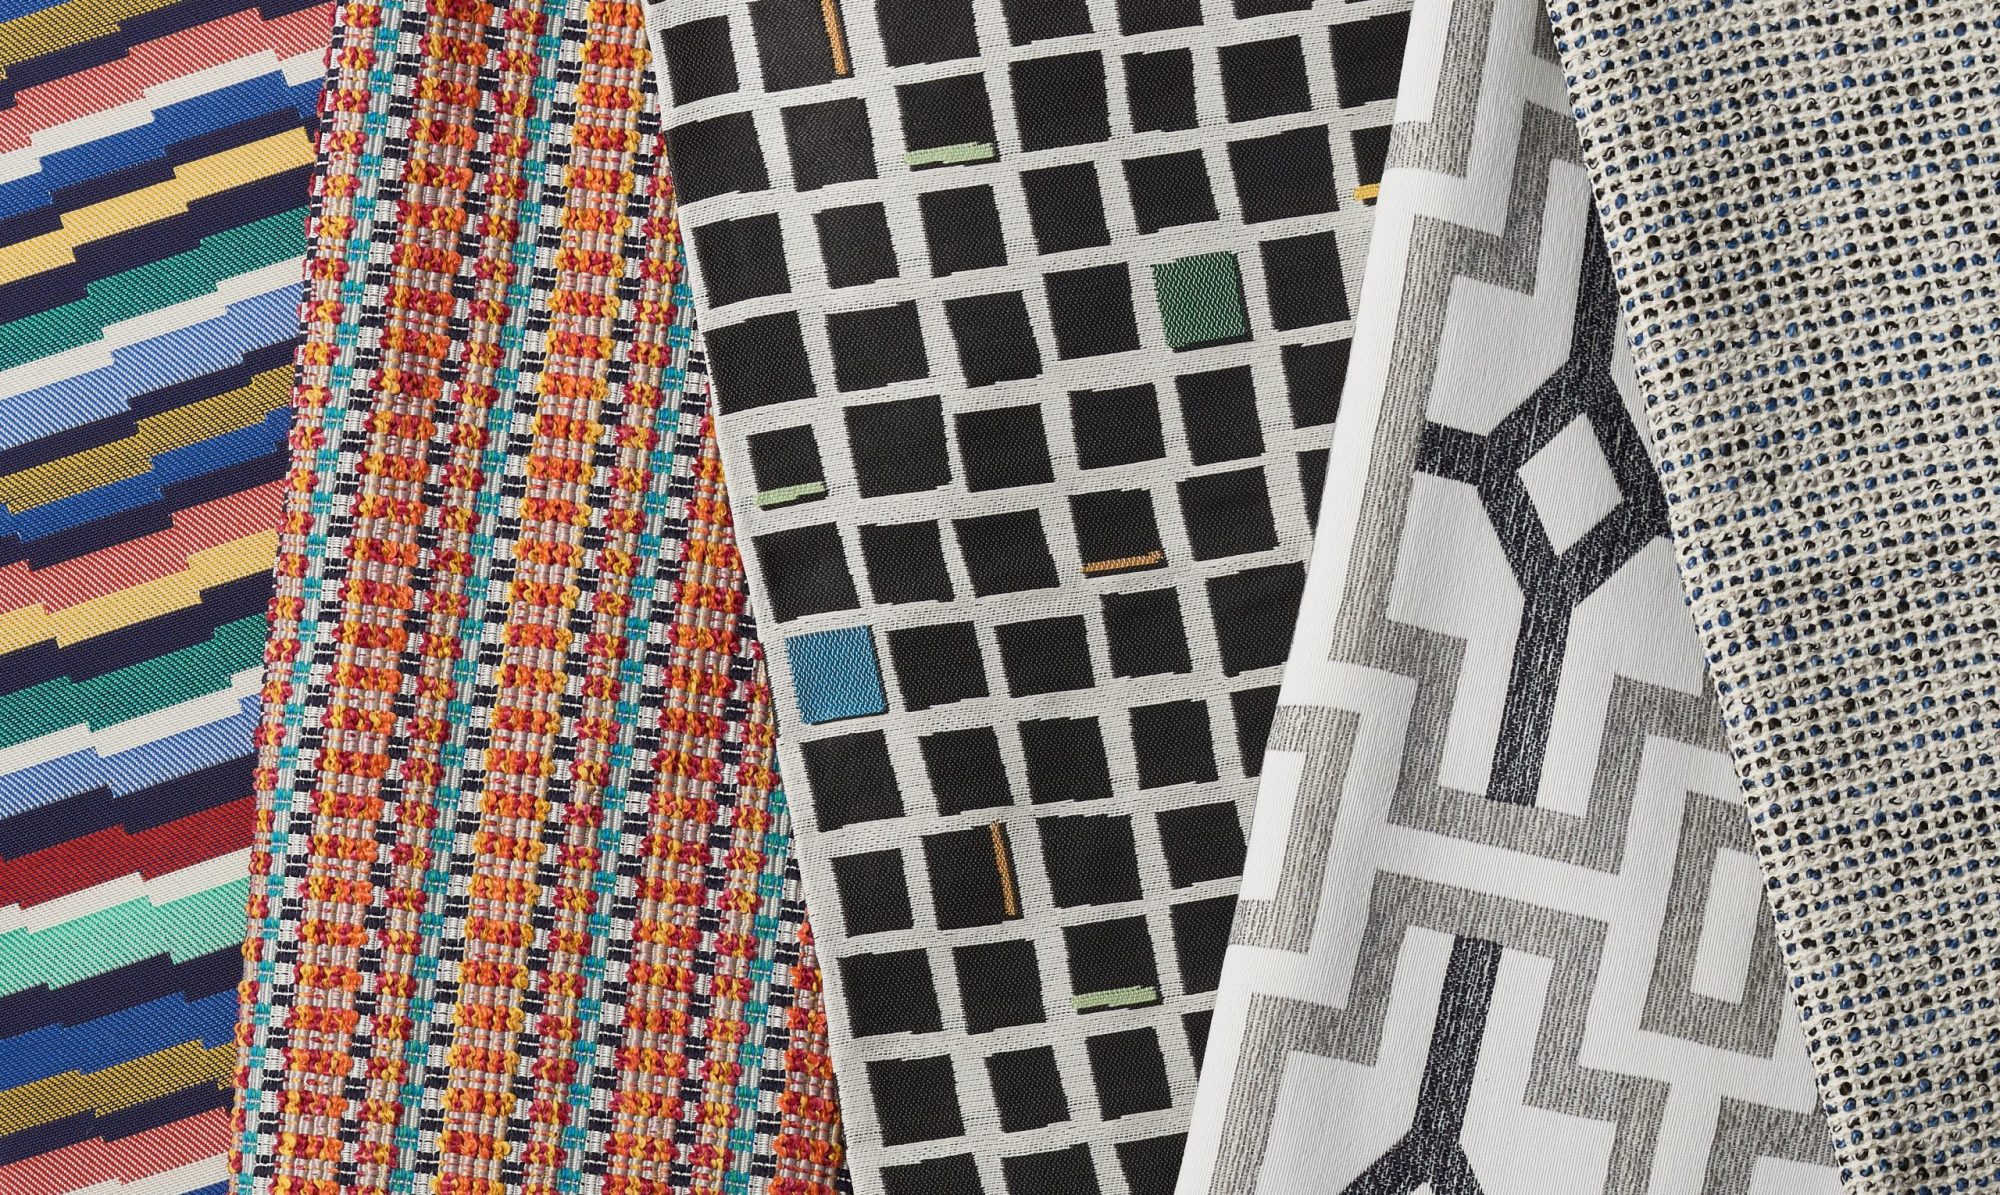 Crazy patterned fabric samples